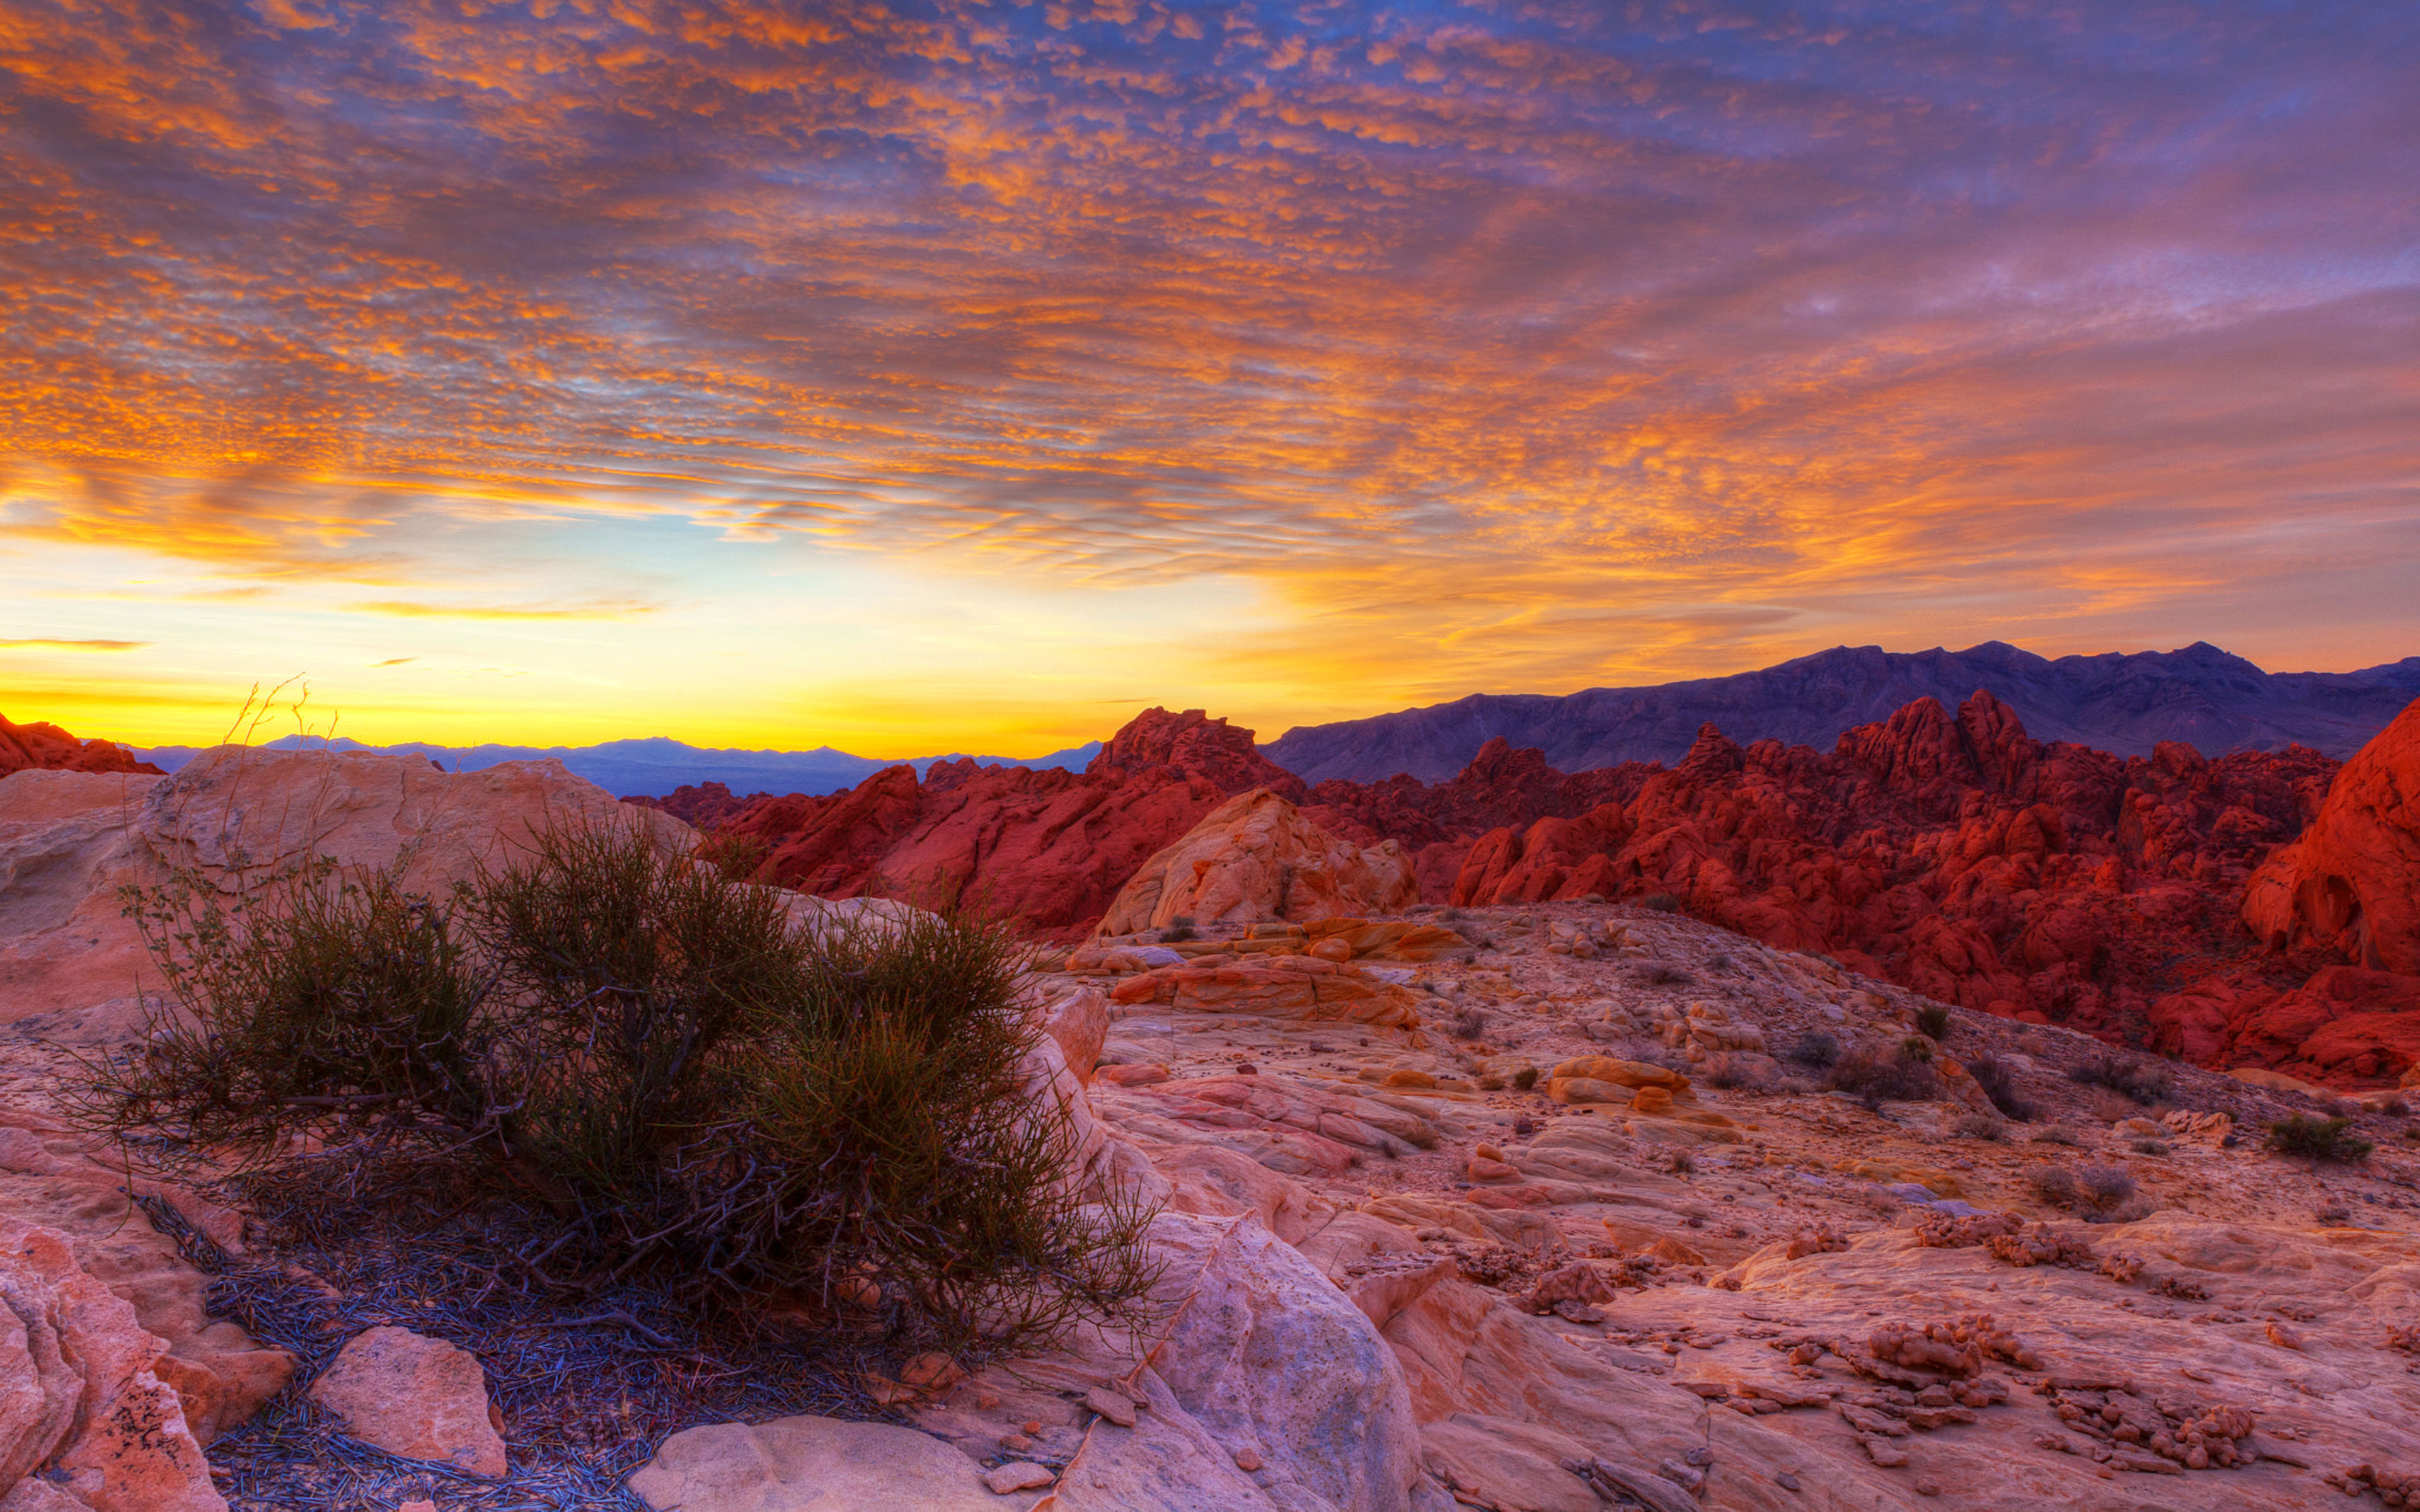 Valley Of Fire State Park Overton Nevada Landscape Sunrise 4k Ultra Hd Tv Wallpapers For Desktop Laptop Tablet And Mobile Phones 3840x2400 : Wallpapers13